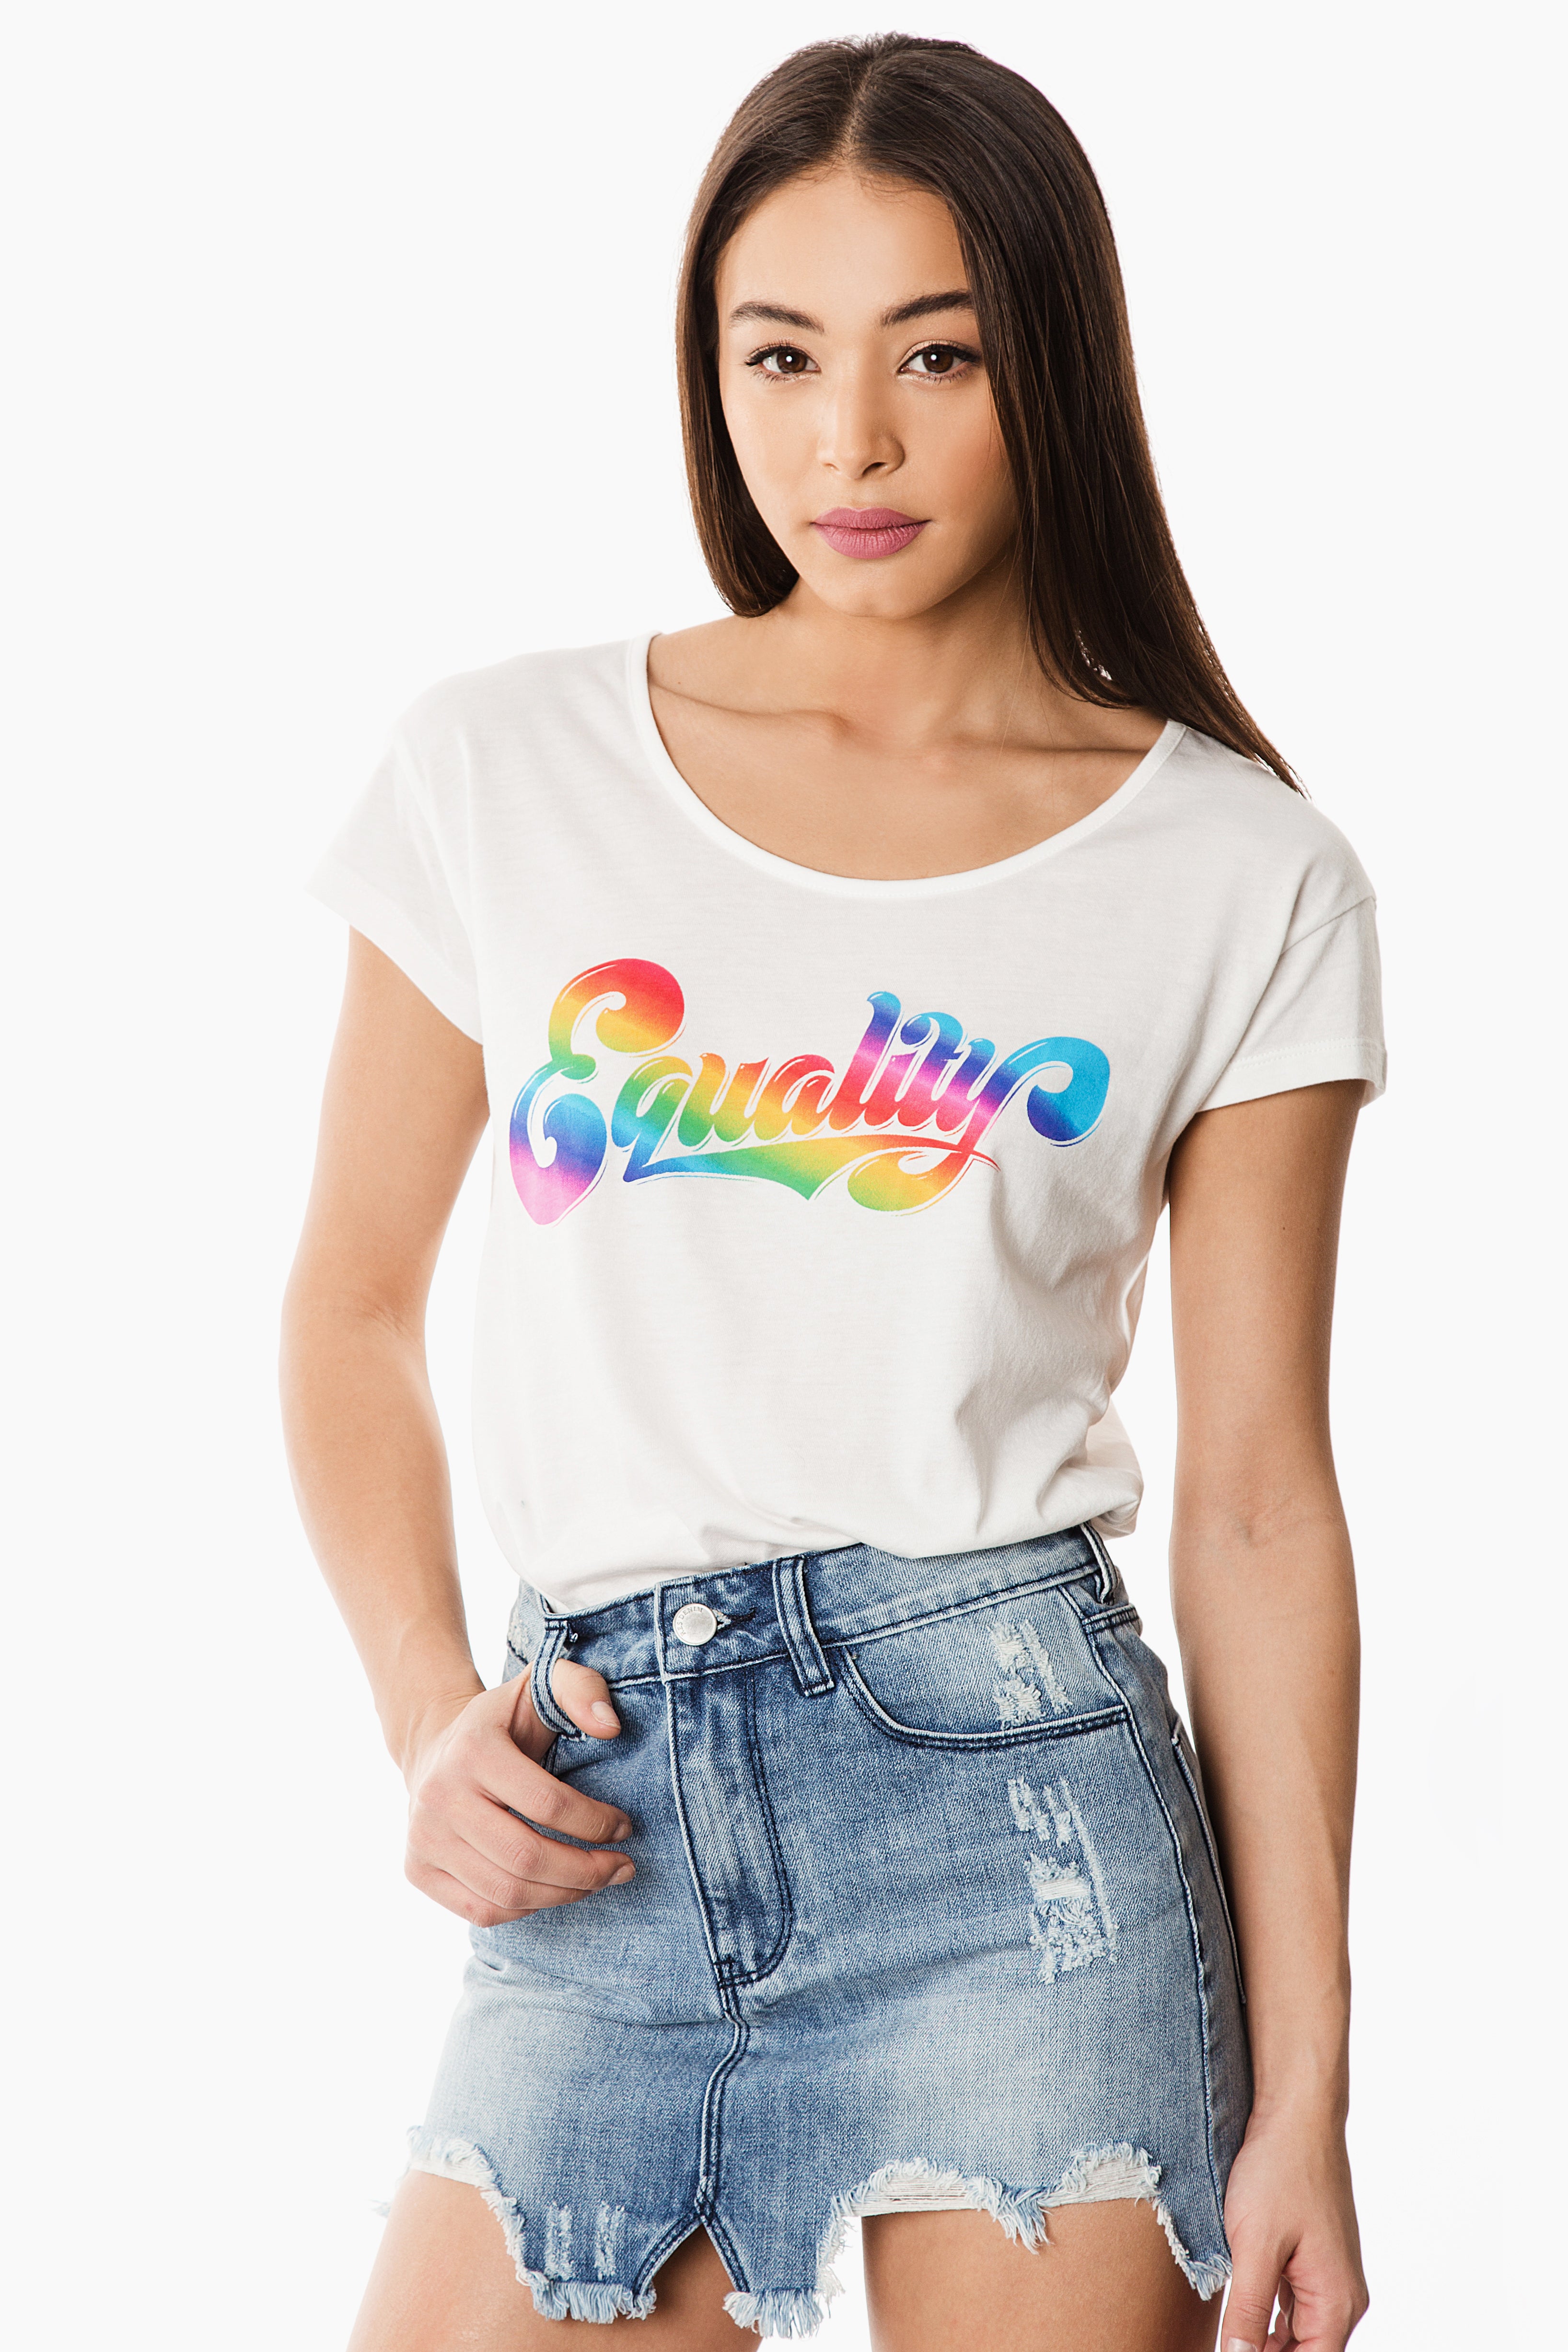 Equality Feminist Graphic Tee - White